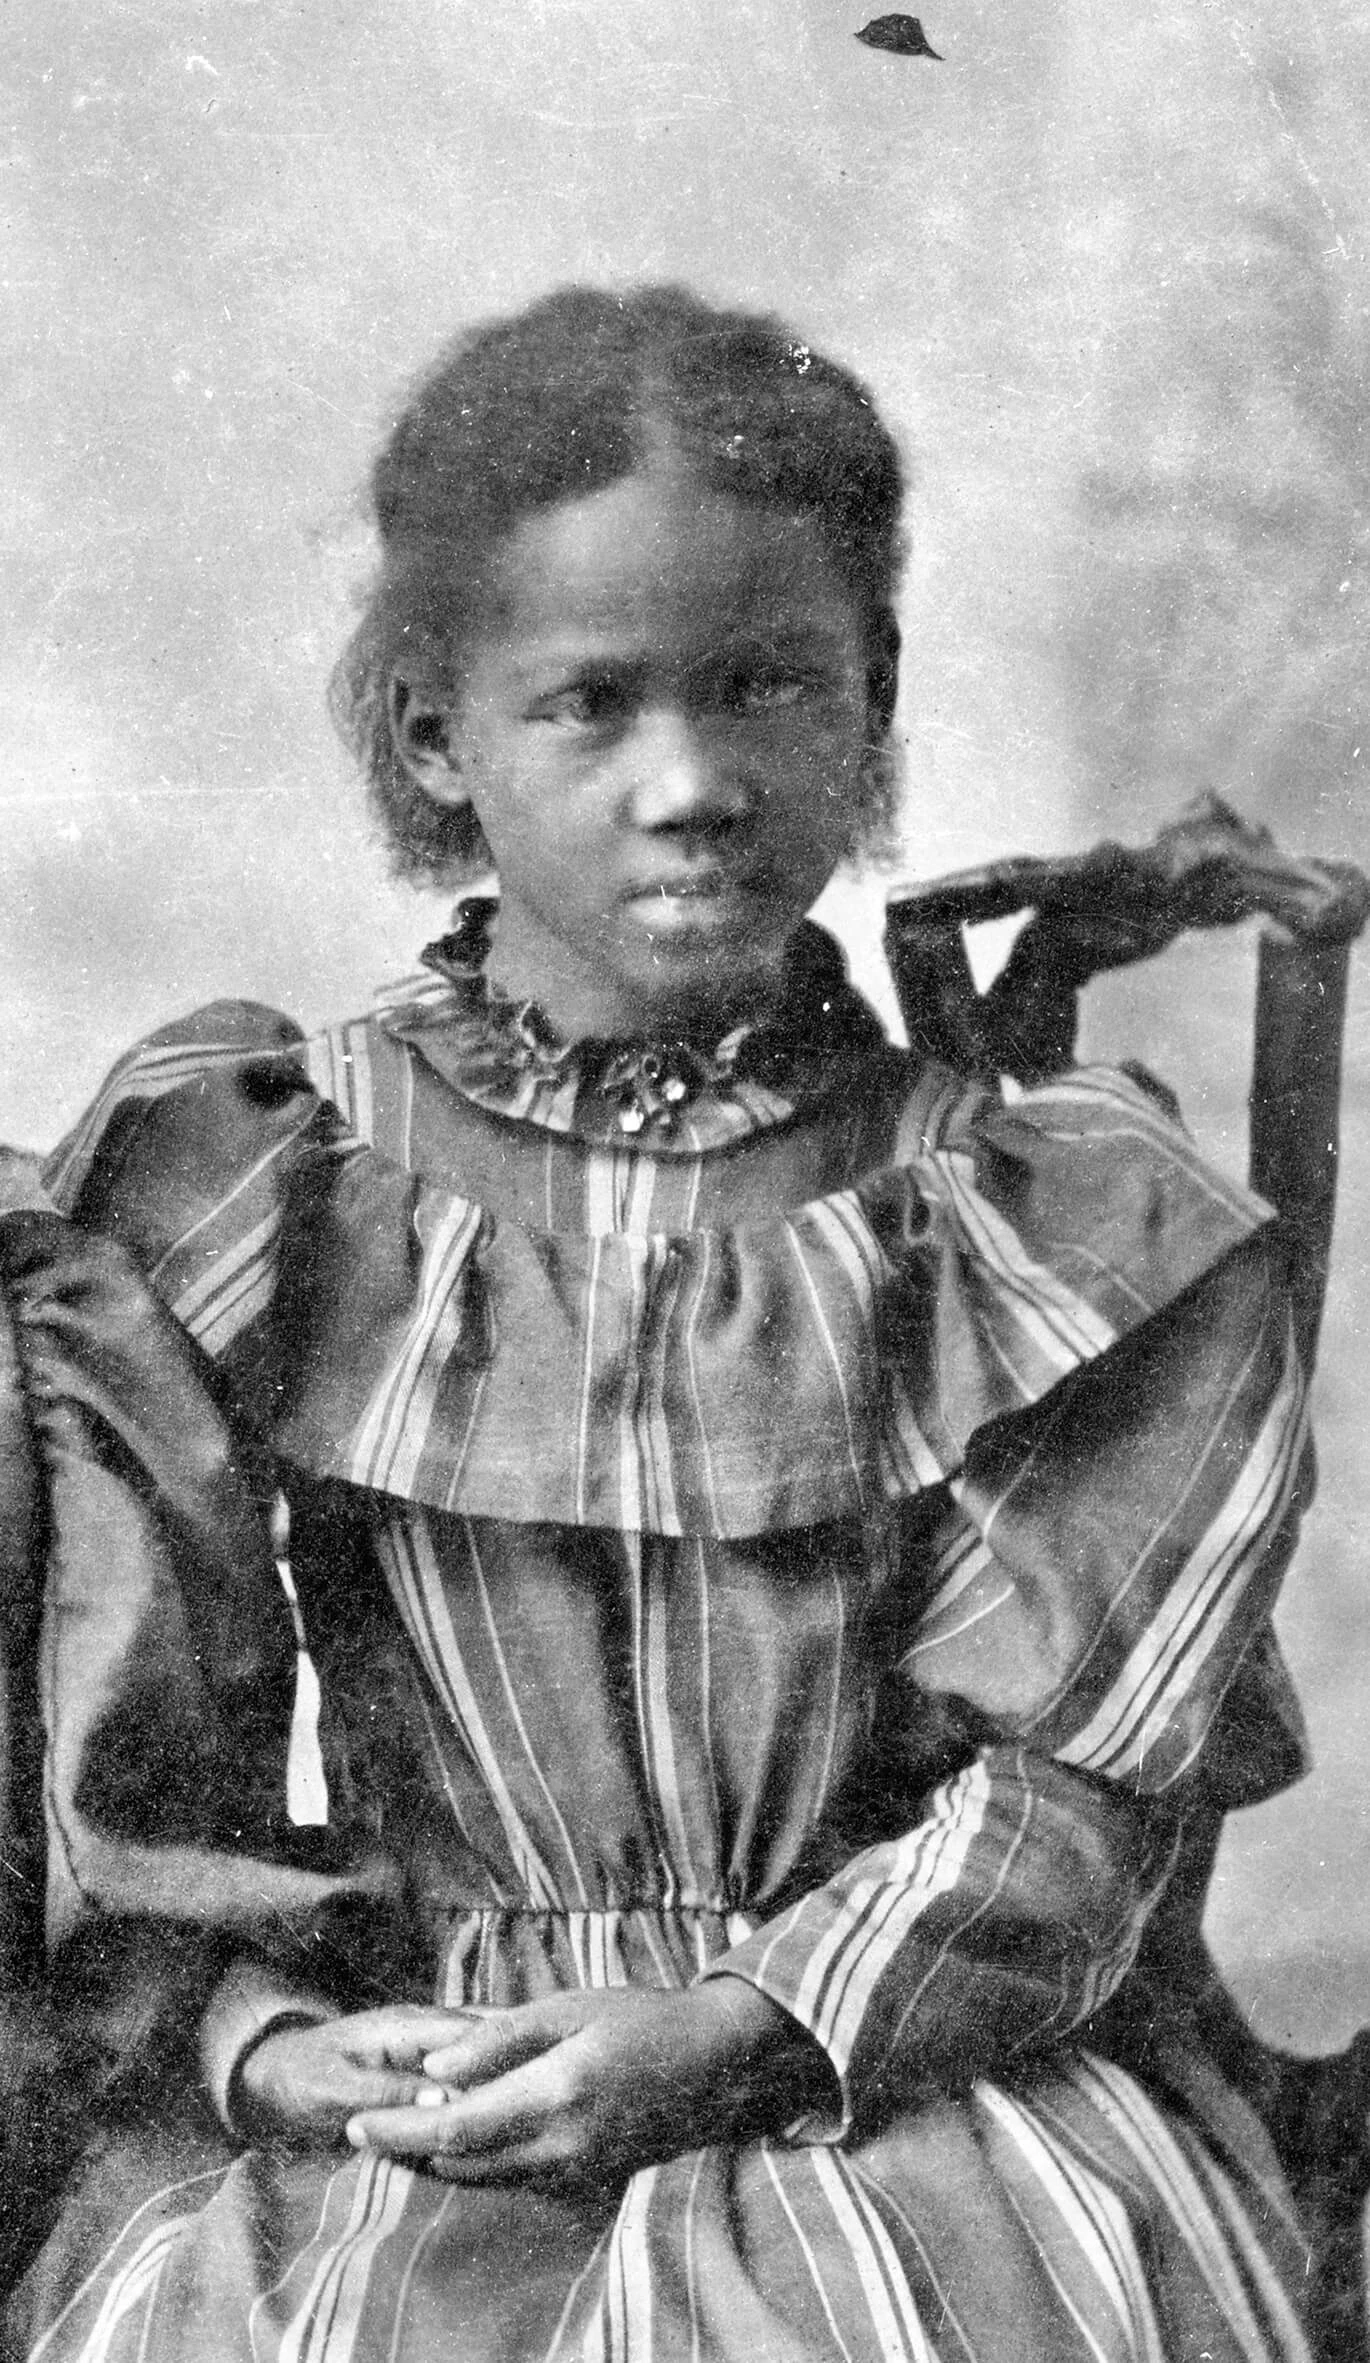 Portrait of a young Black girl wearing a striped dress. Her hands are together on her lap